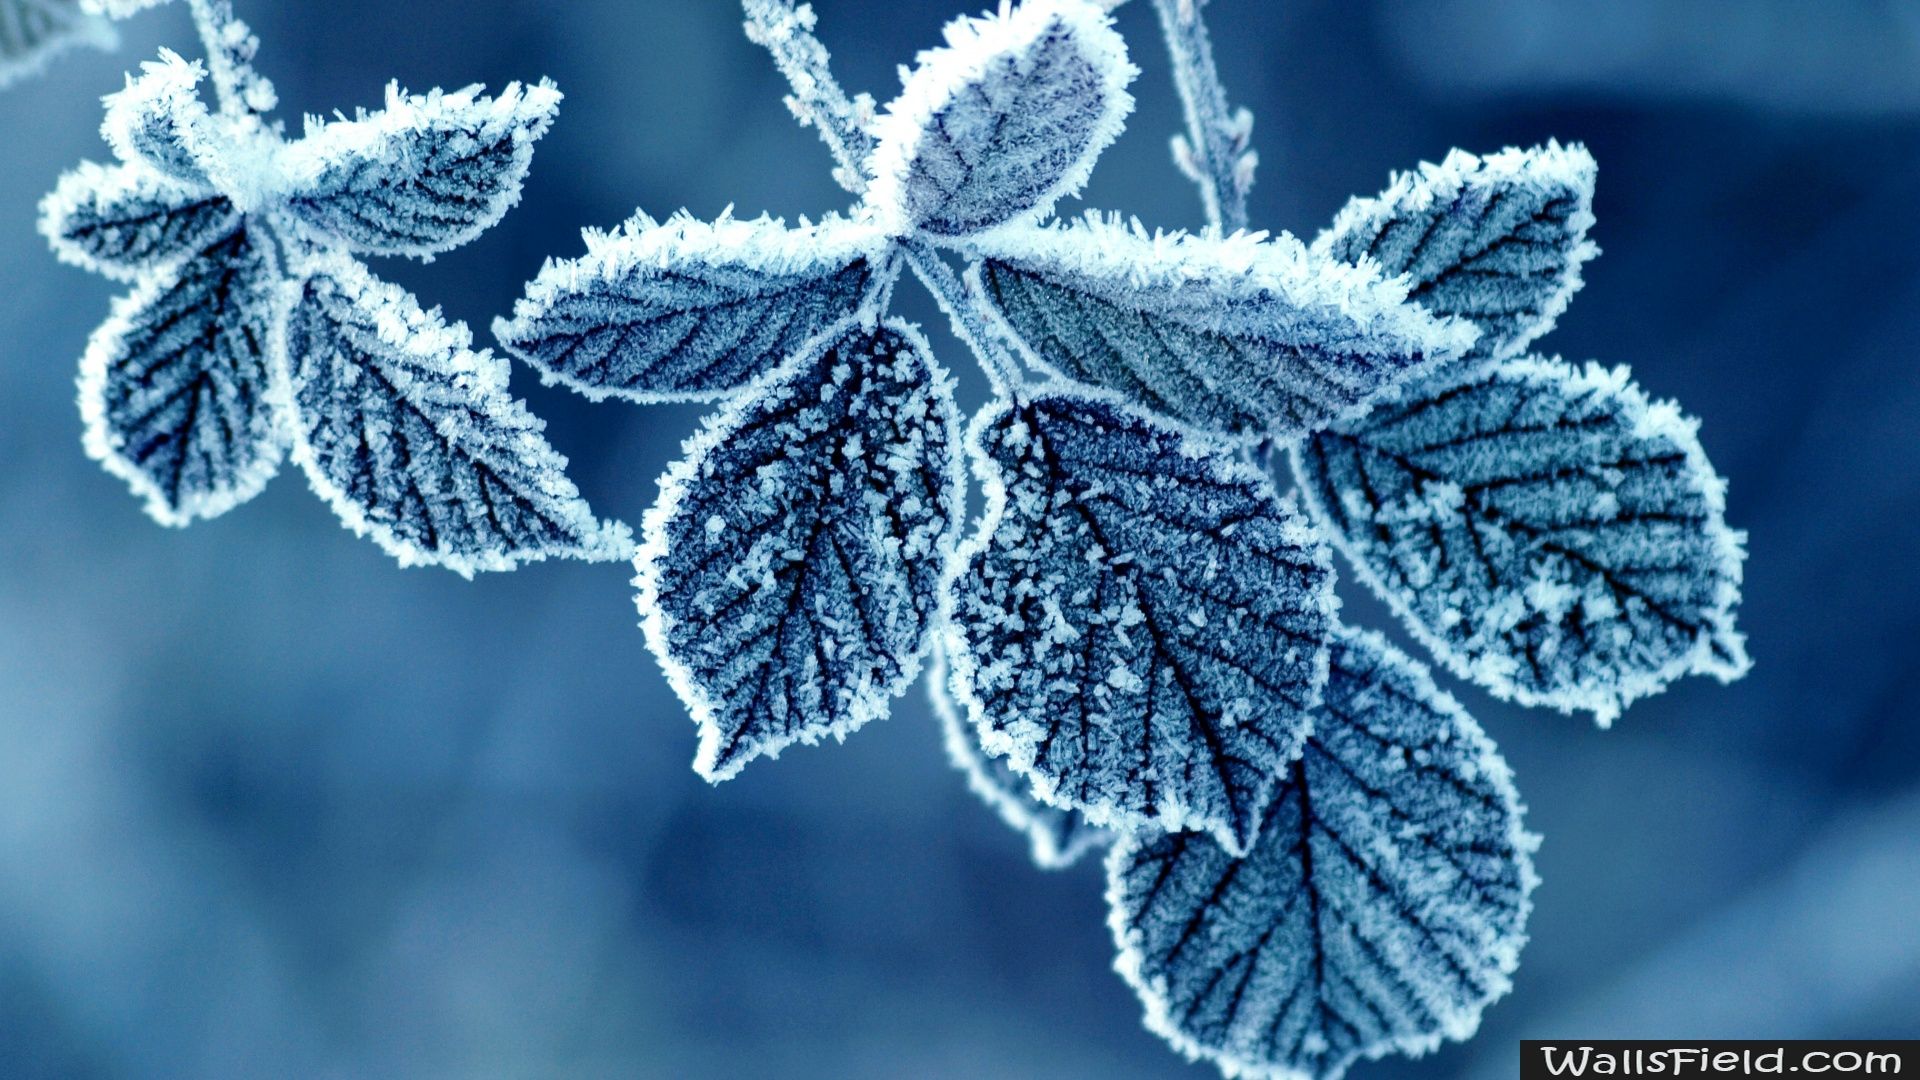 You can view, download and comment on Frozen Leaves free hd ...